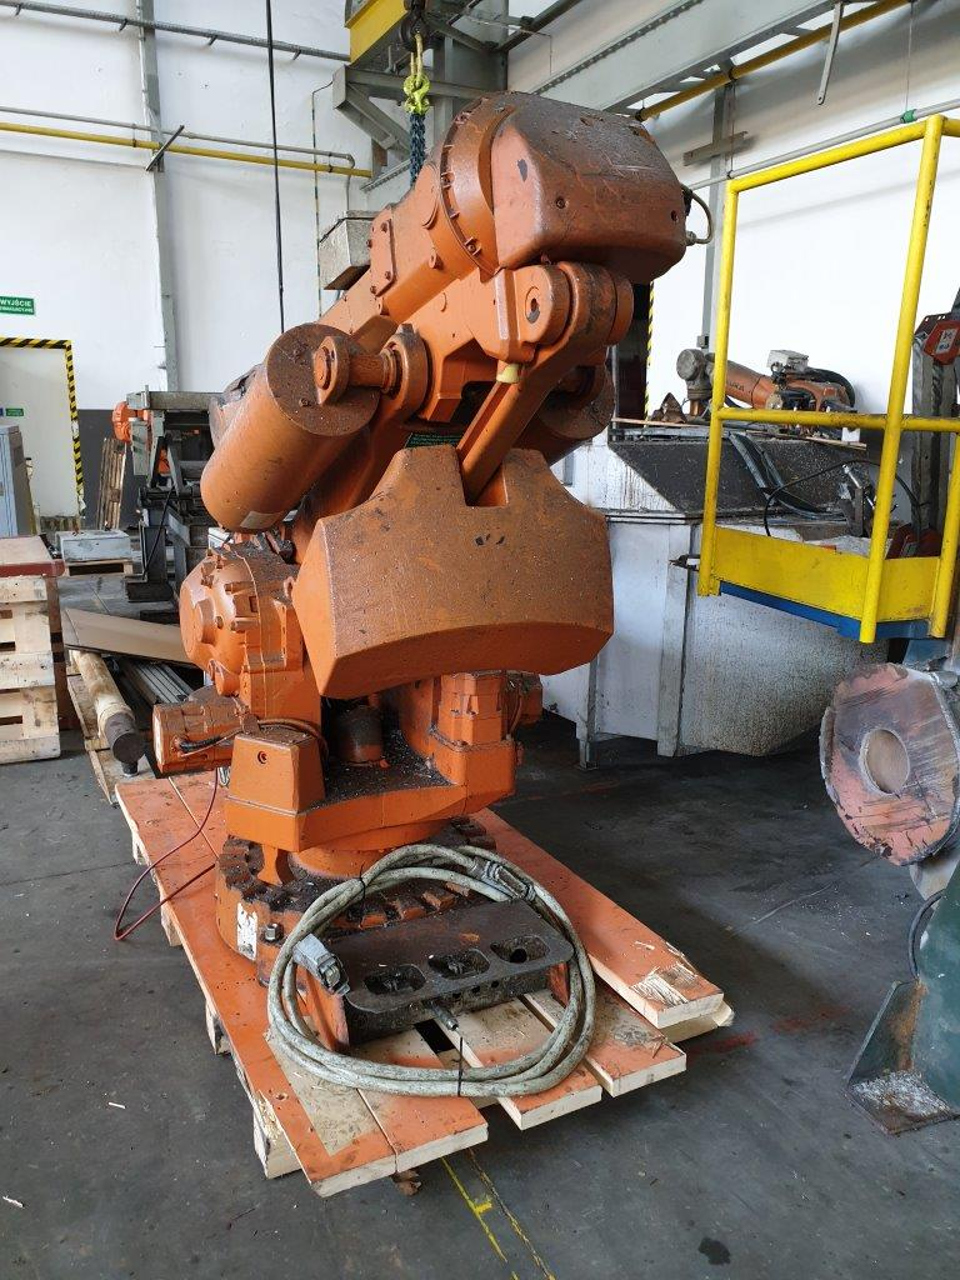 ABB IRB 6600 foundry robot HR1827, used